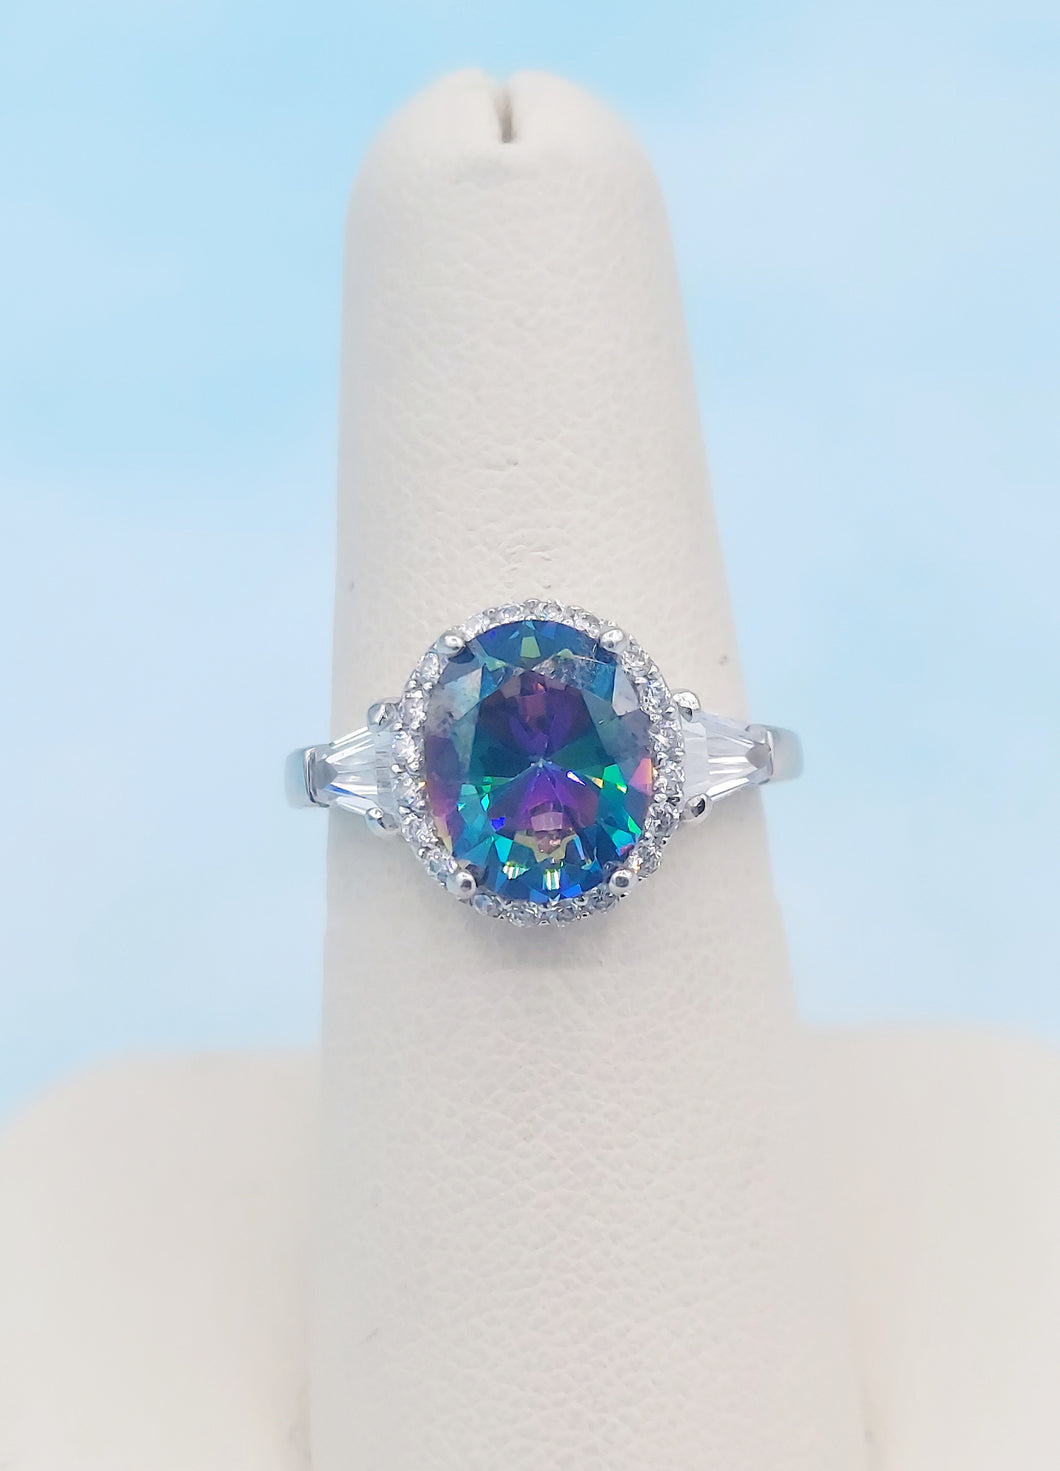 Mystic Topaz and CZ Ring - Sterling Silver